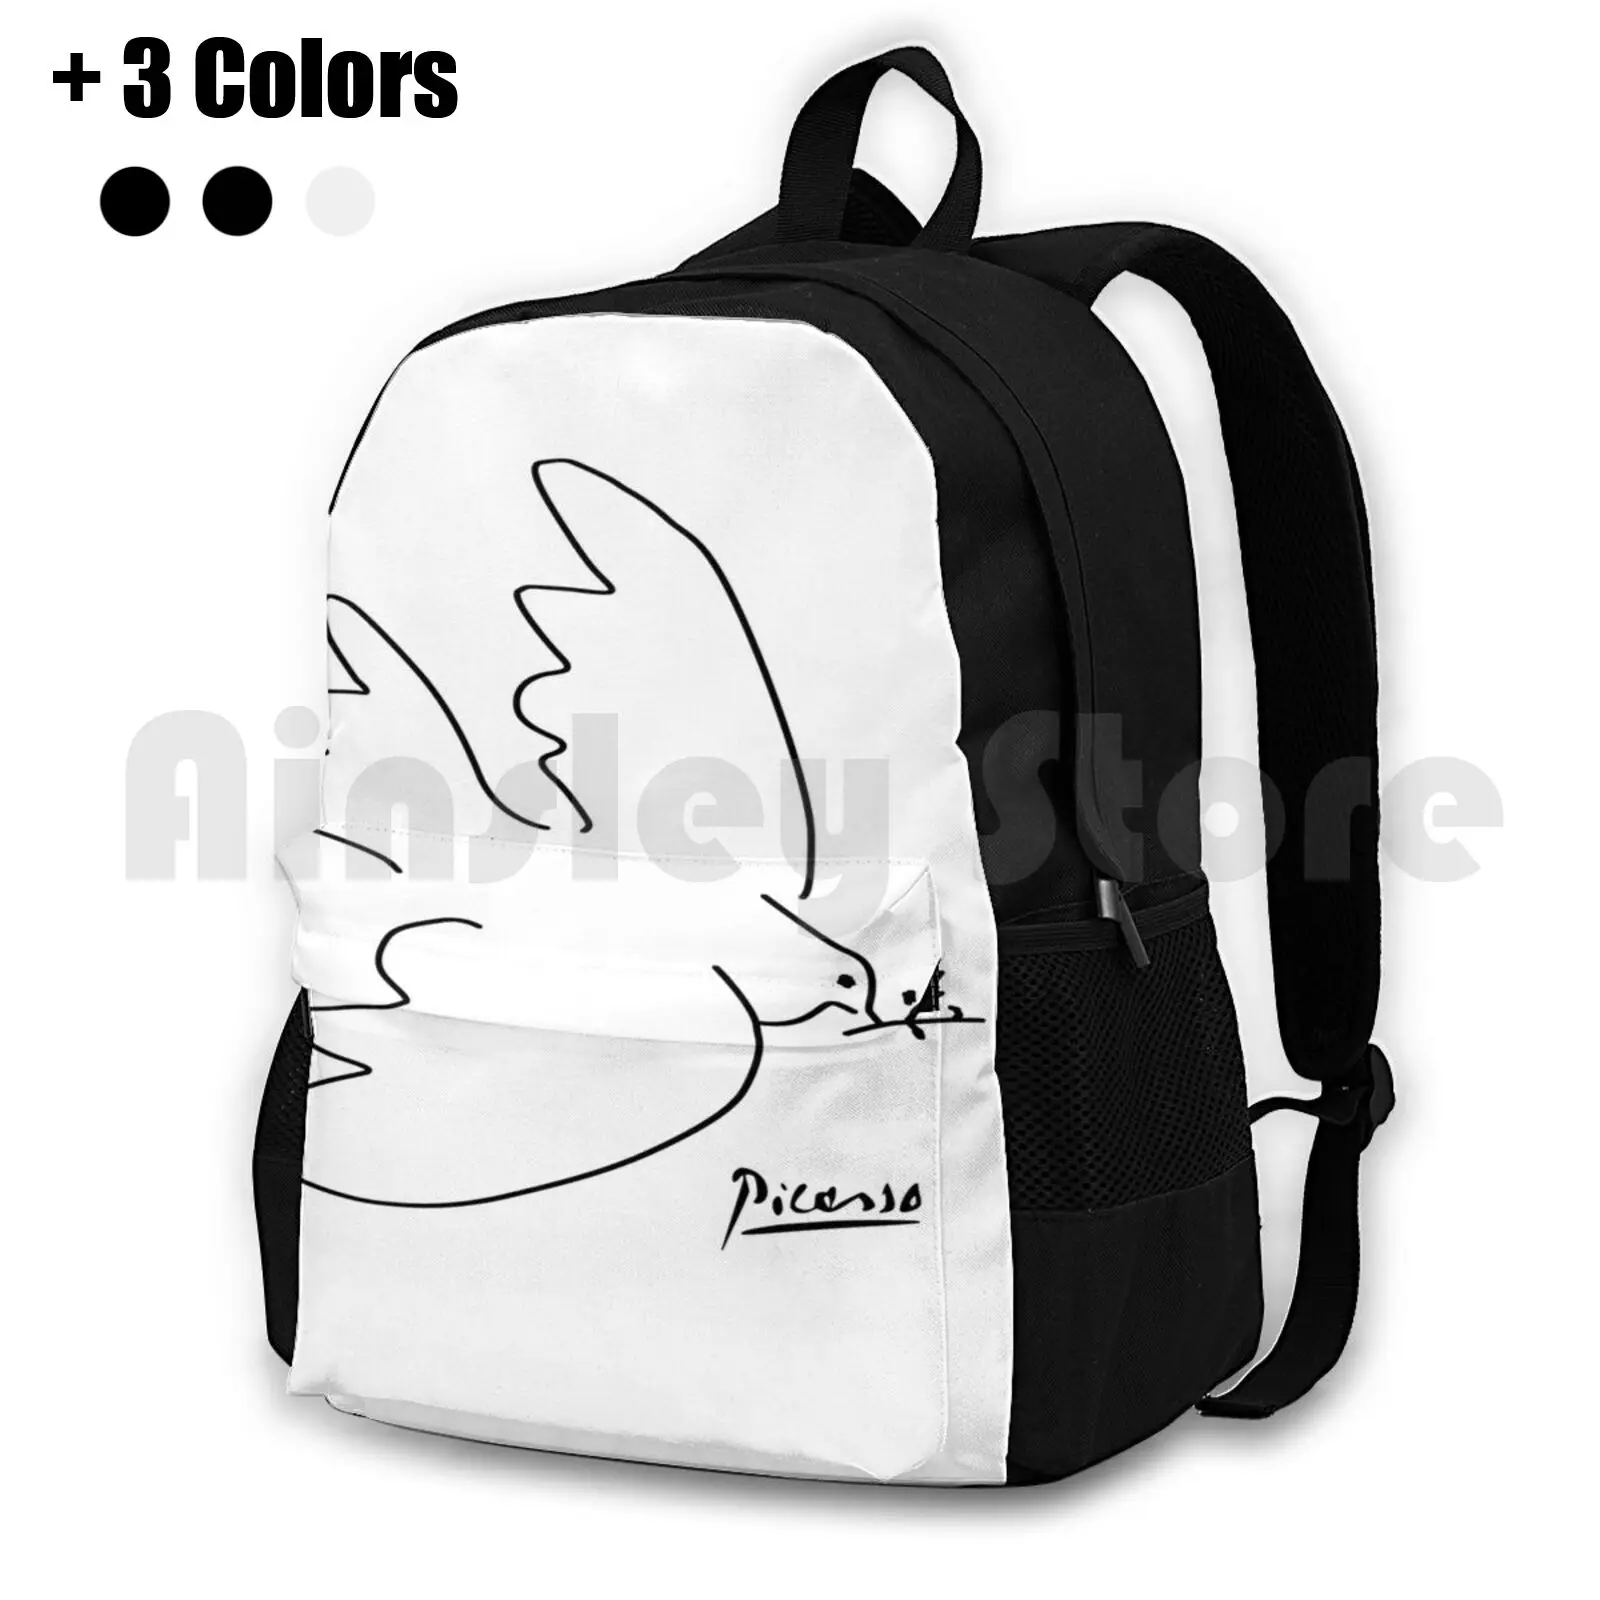 

Picasso-Dove Of Peace Outdoor Hiking Backpack Riding Climbing Sports Bag Picasso Pablo Picasso Pablo Ruiz Picasso Cubism